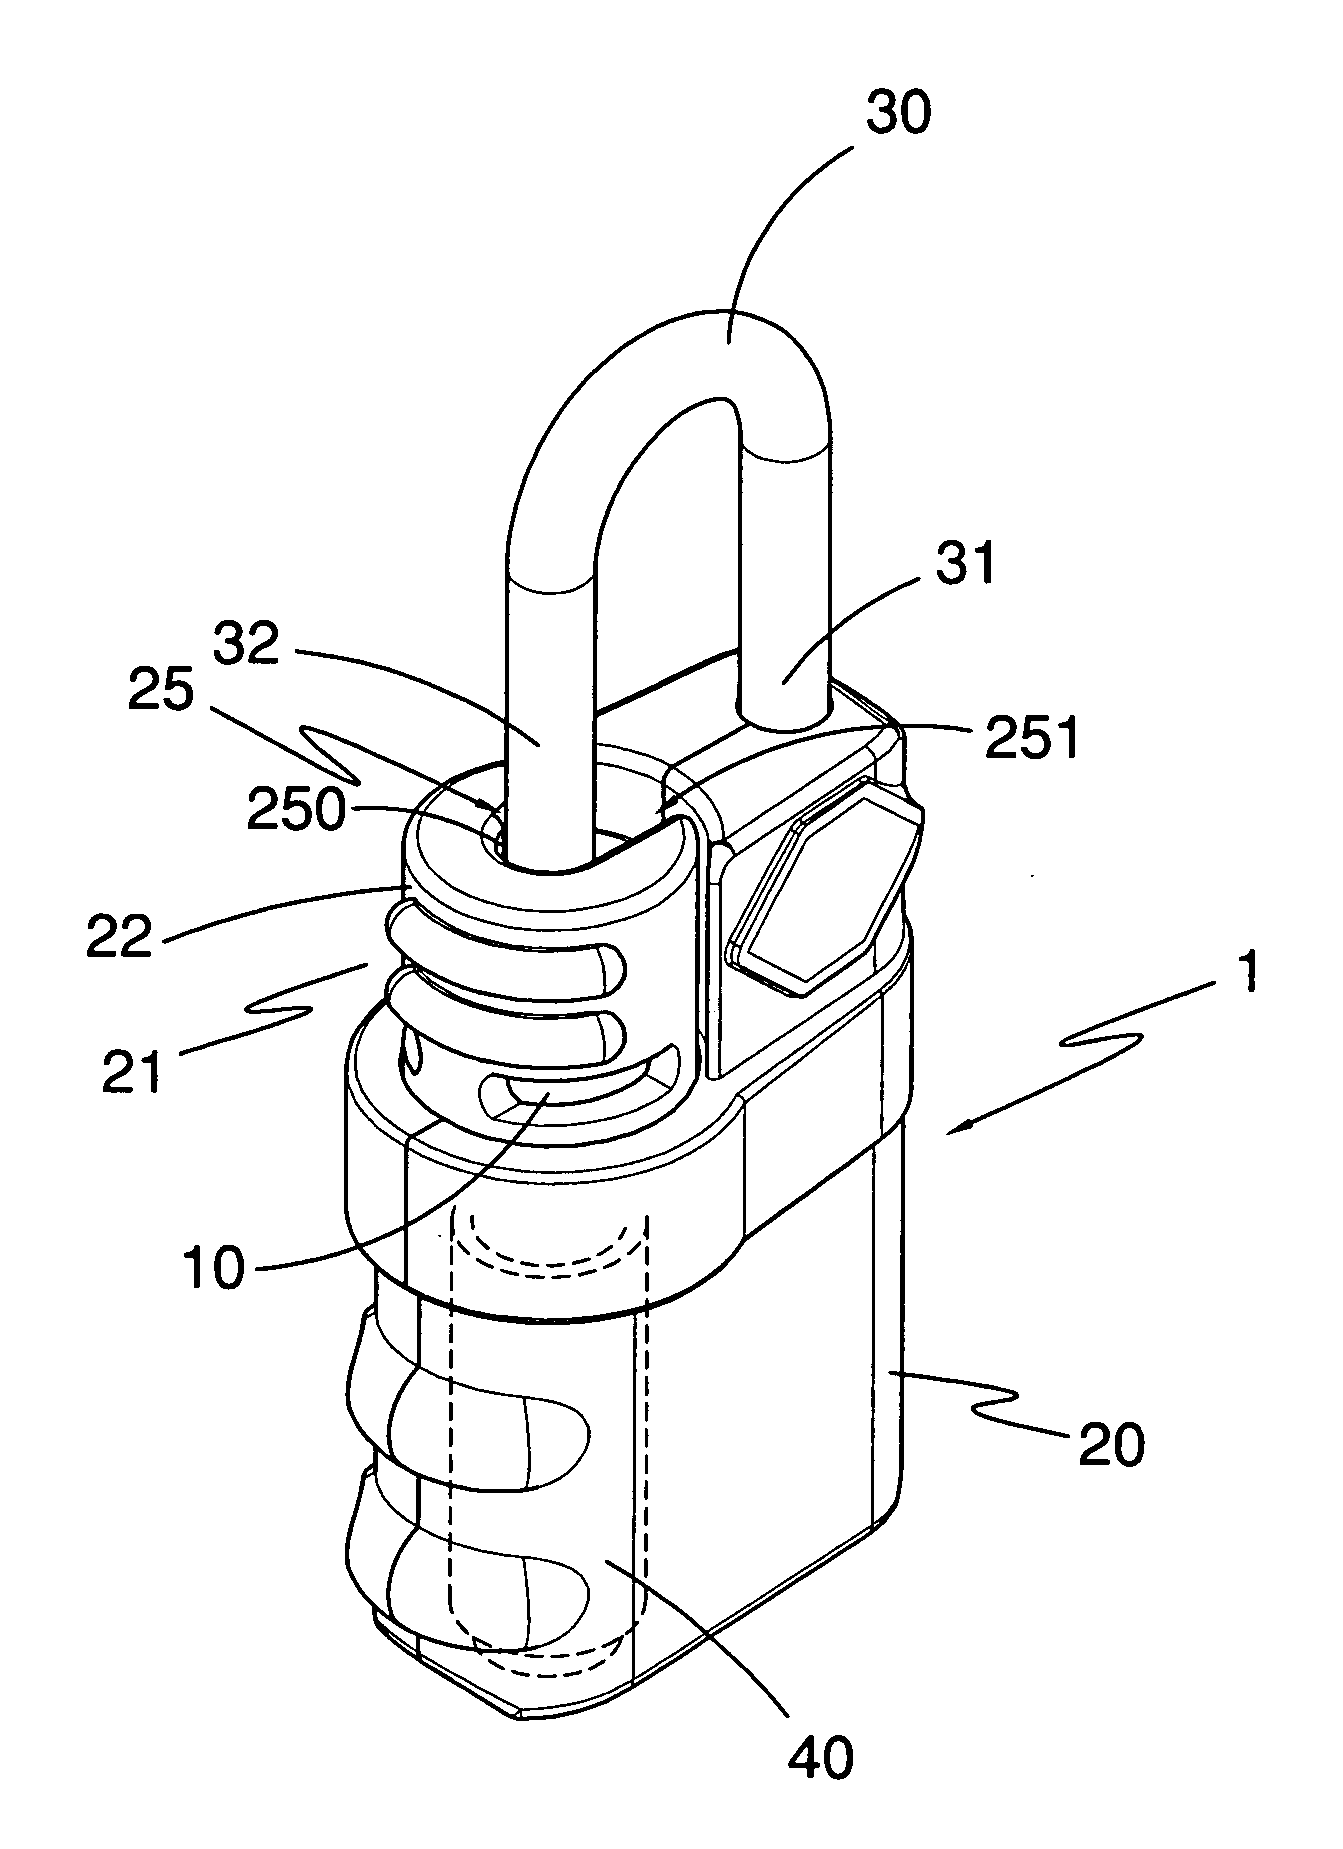 Lock With Indicator And Multiple Key-Actuated Core